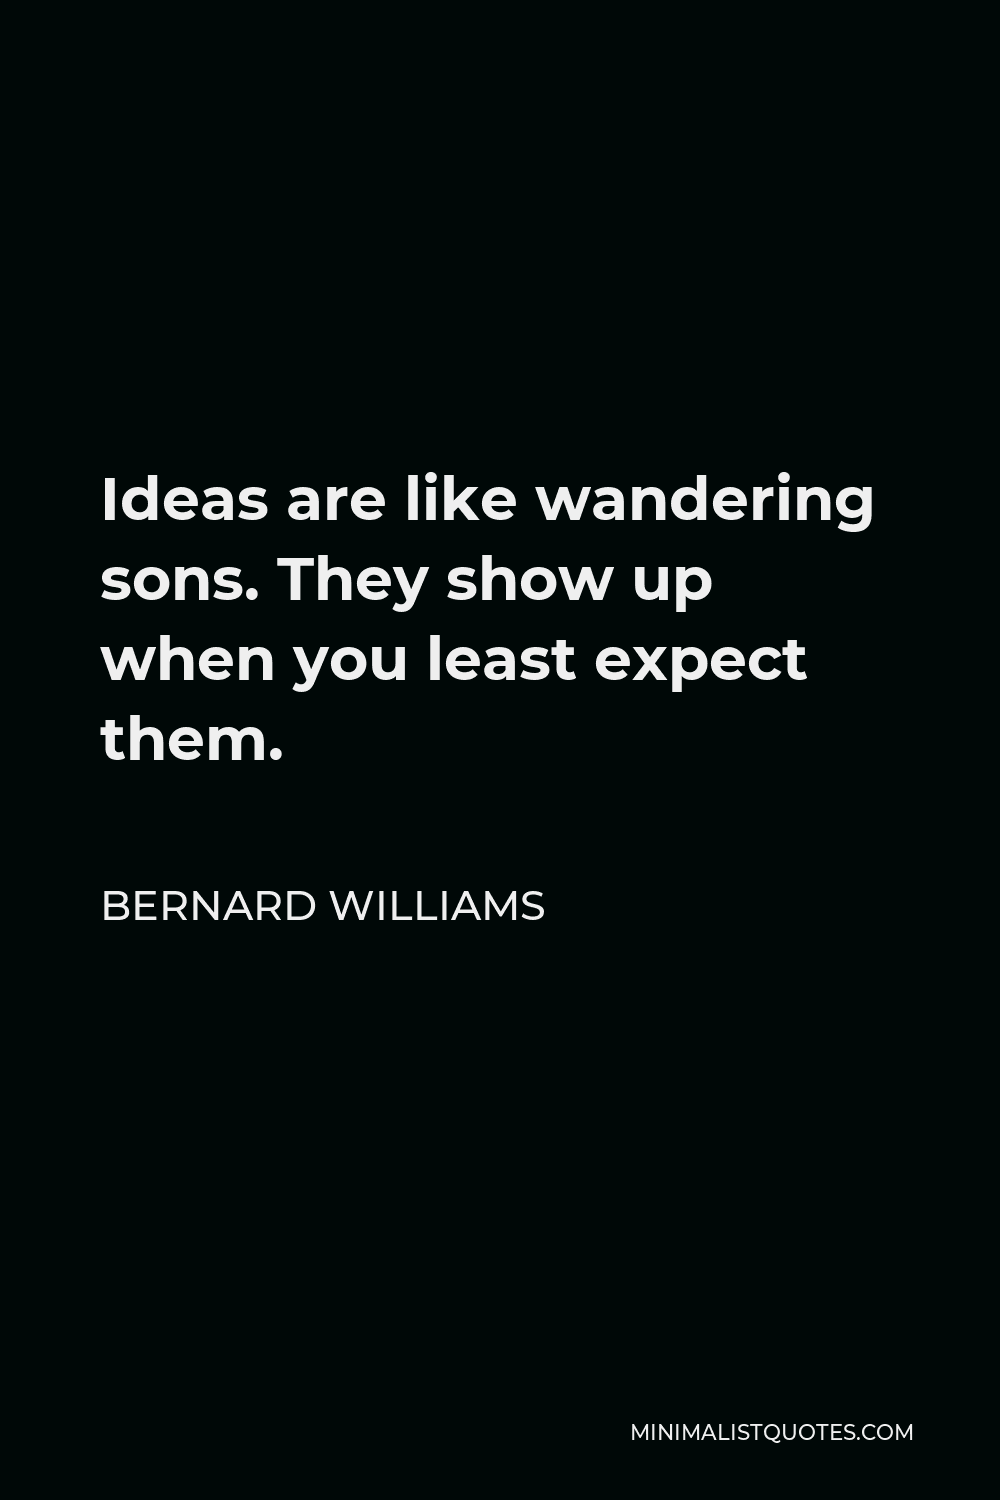 Bernard Williams Quote - Ideas are like wandering sons. They show up when you least expect them.